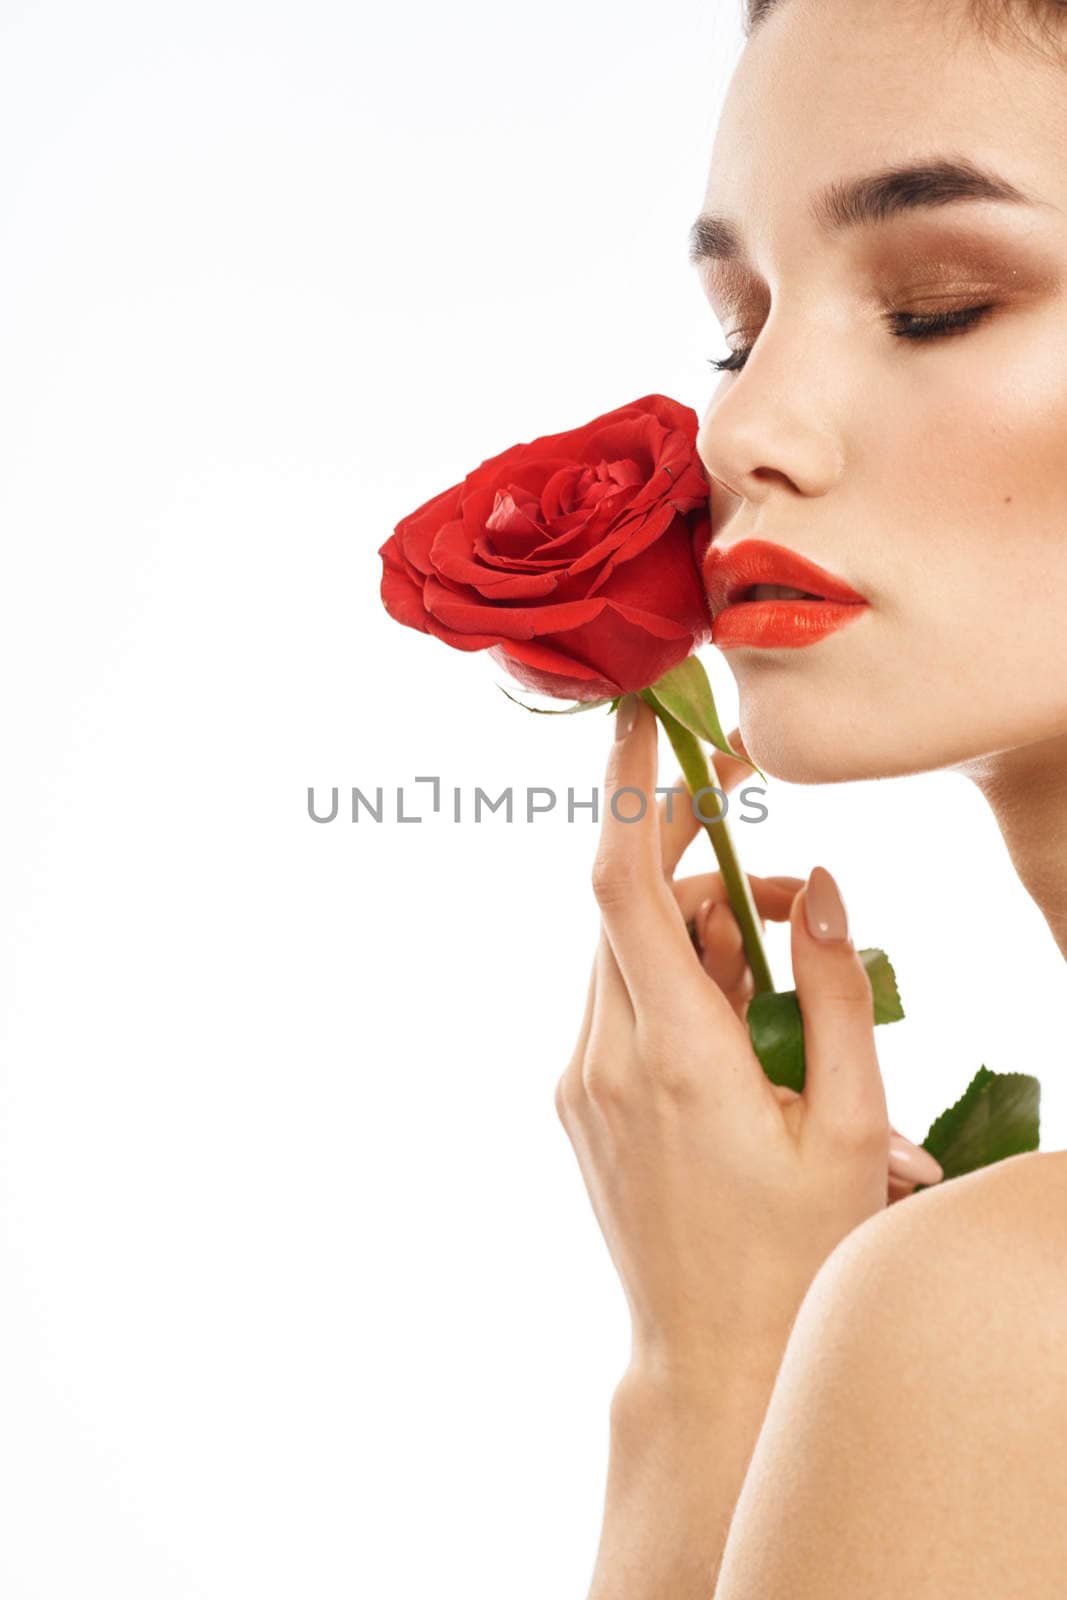 Portrait of woman with red rose naked shoulders Make-up on brunette face. High quality photo